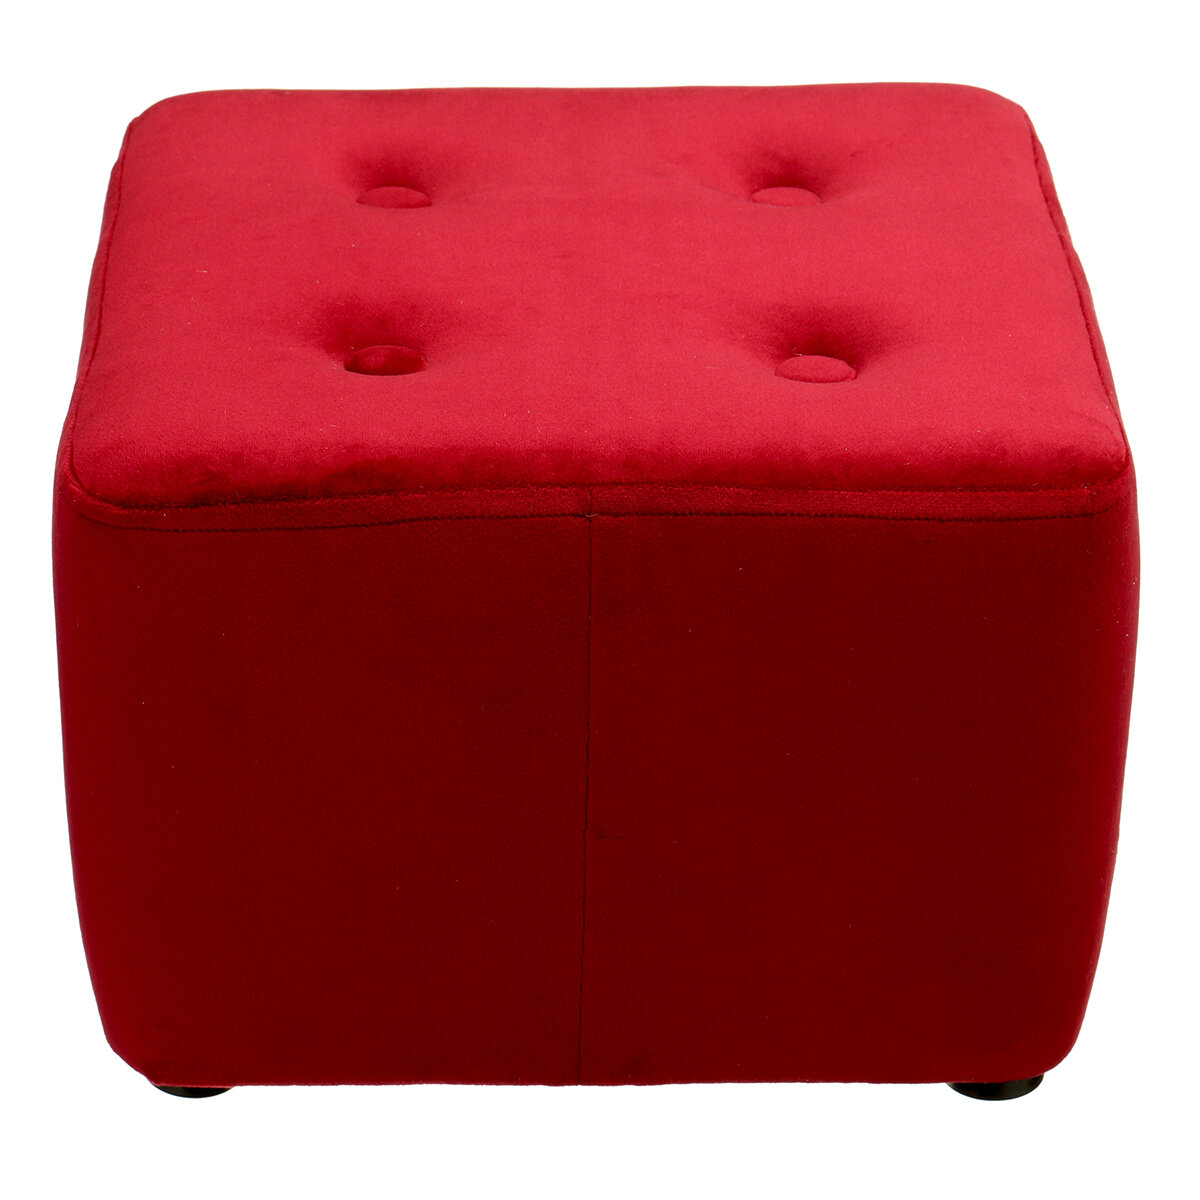 Cube Footstool Soft Sofa Ottoman Footrest Seat Footstool Square Chair Home Office Furniture